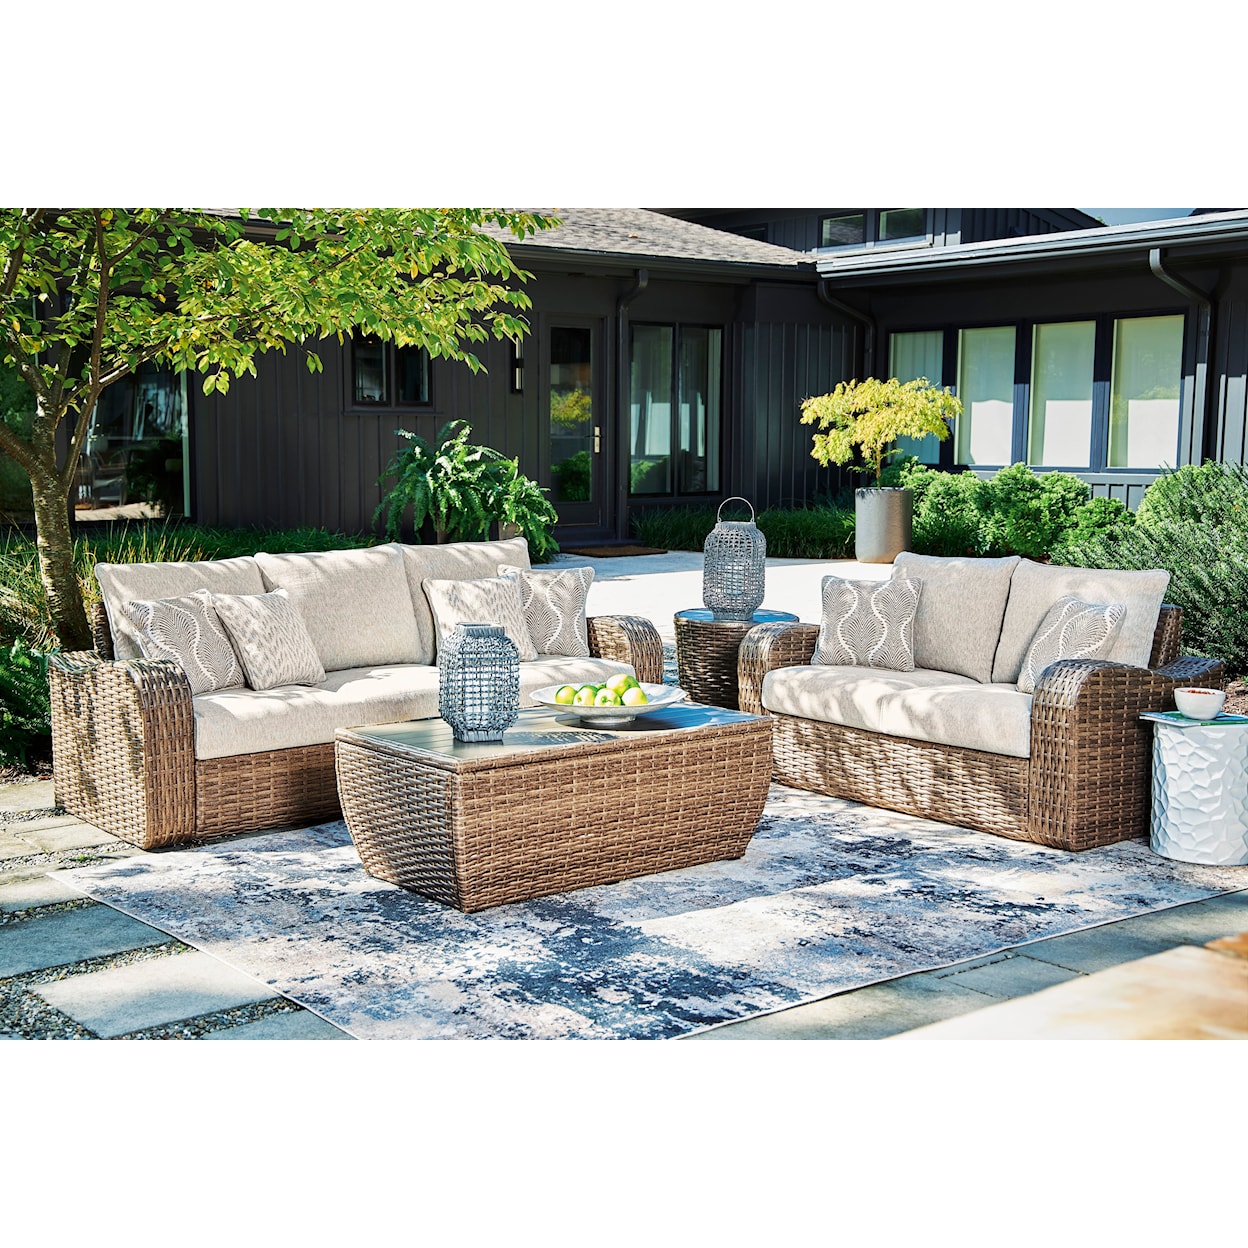 Signature Design by Ashley Sandy Bloom Outdoor Loveseat with Cushion